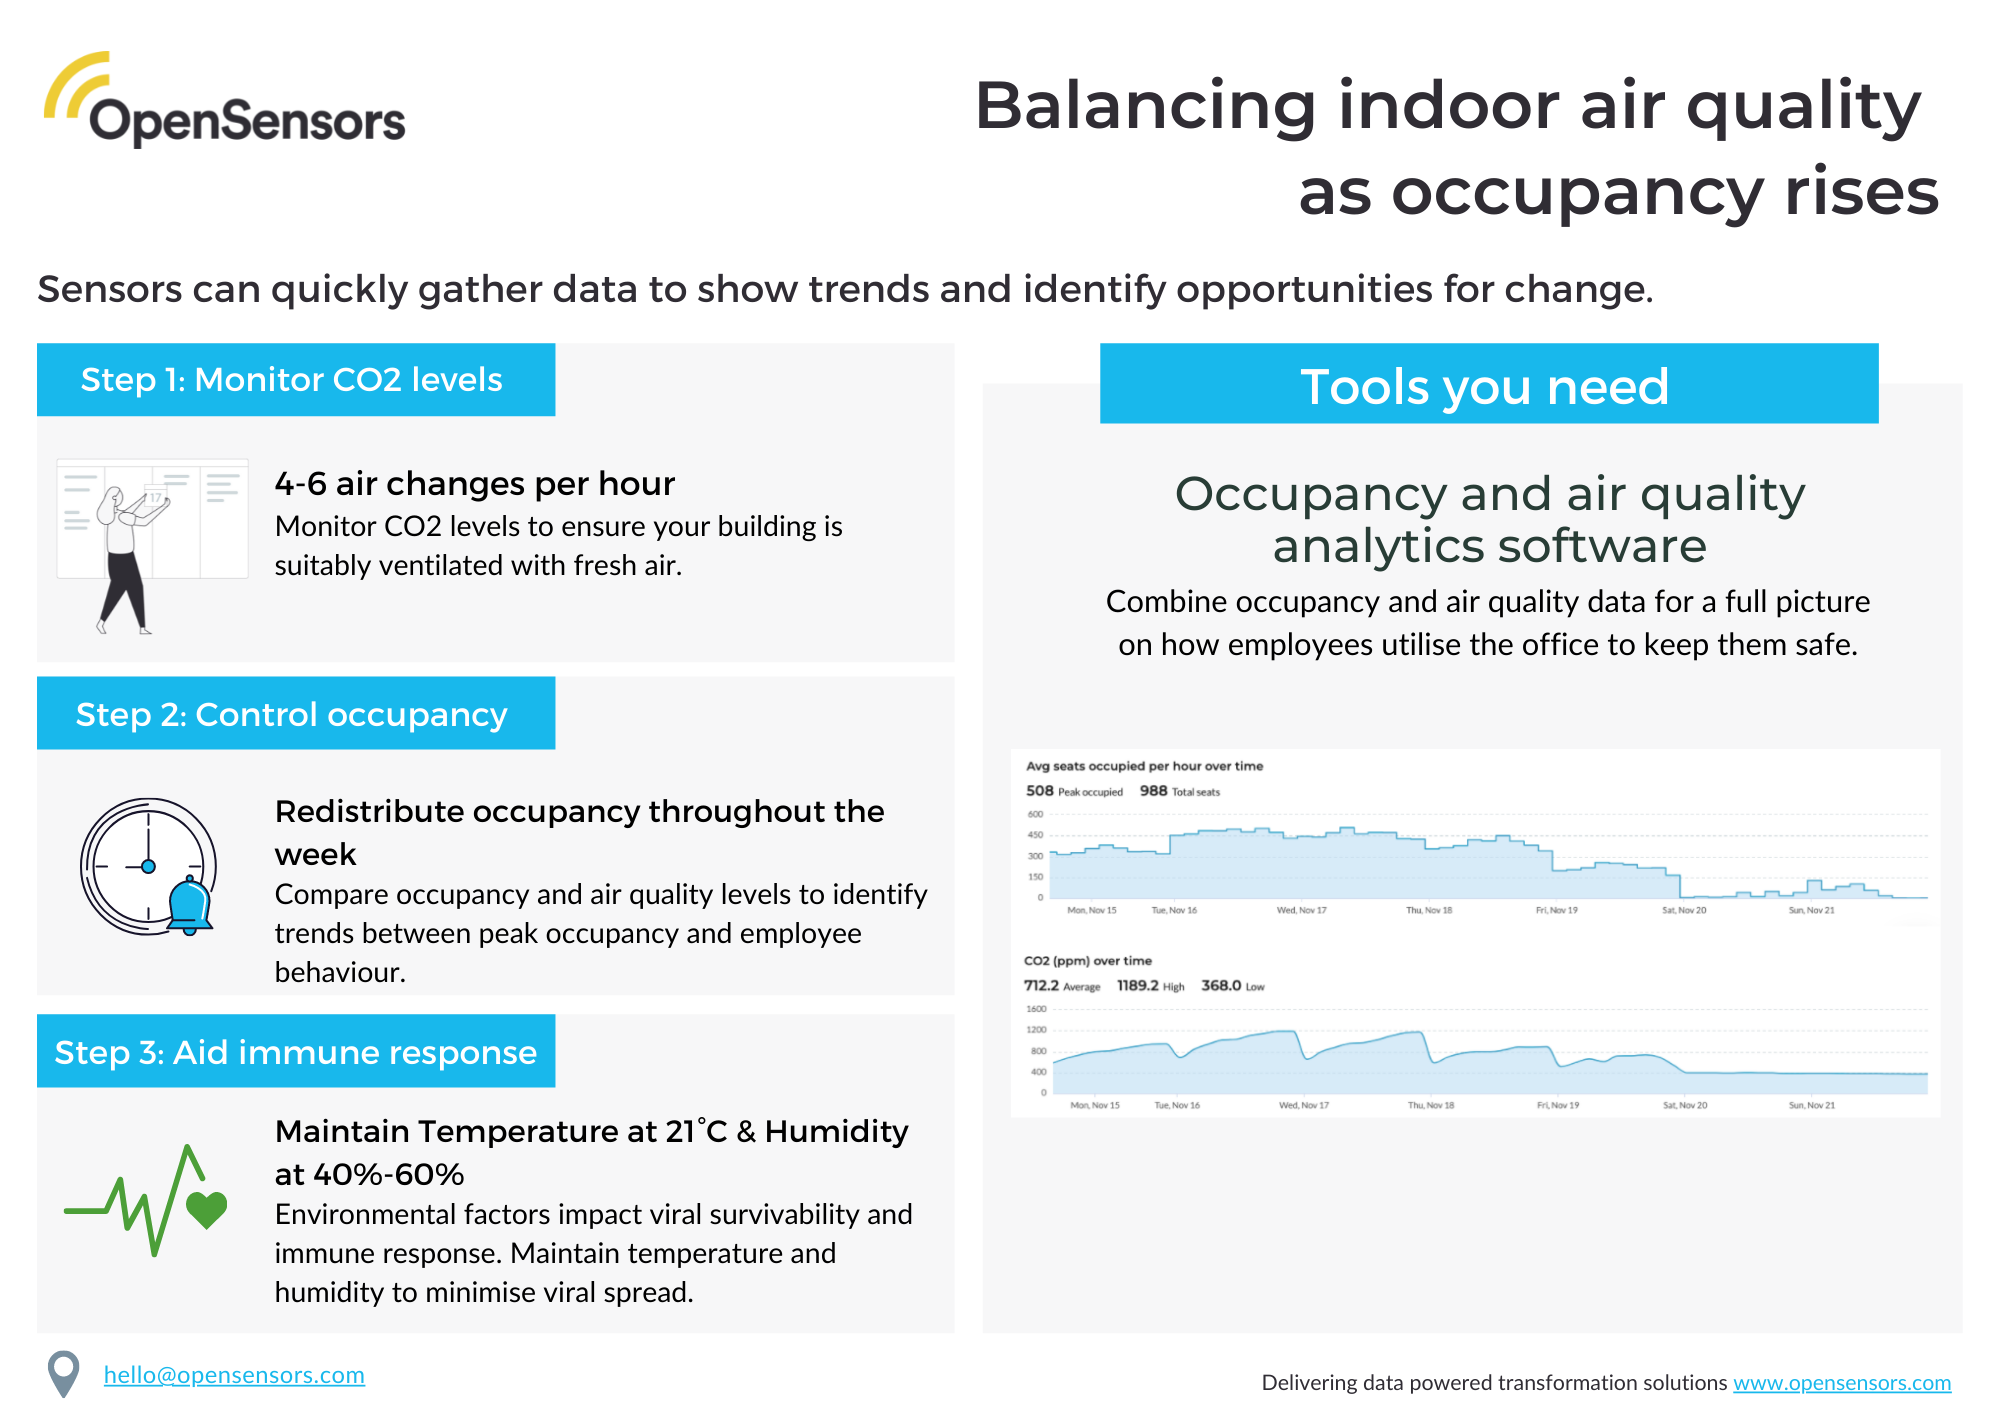 OpenSensors - Balancing indoor air quality as occupancy rises2